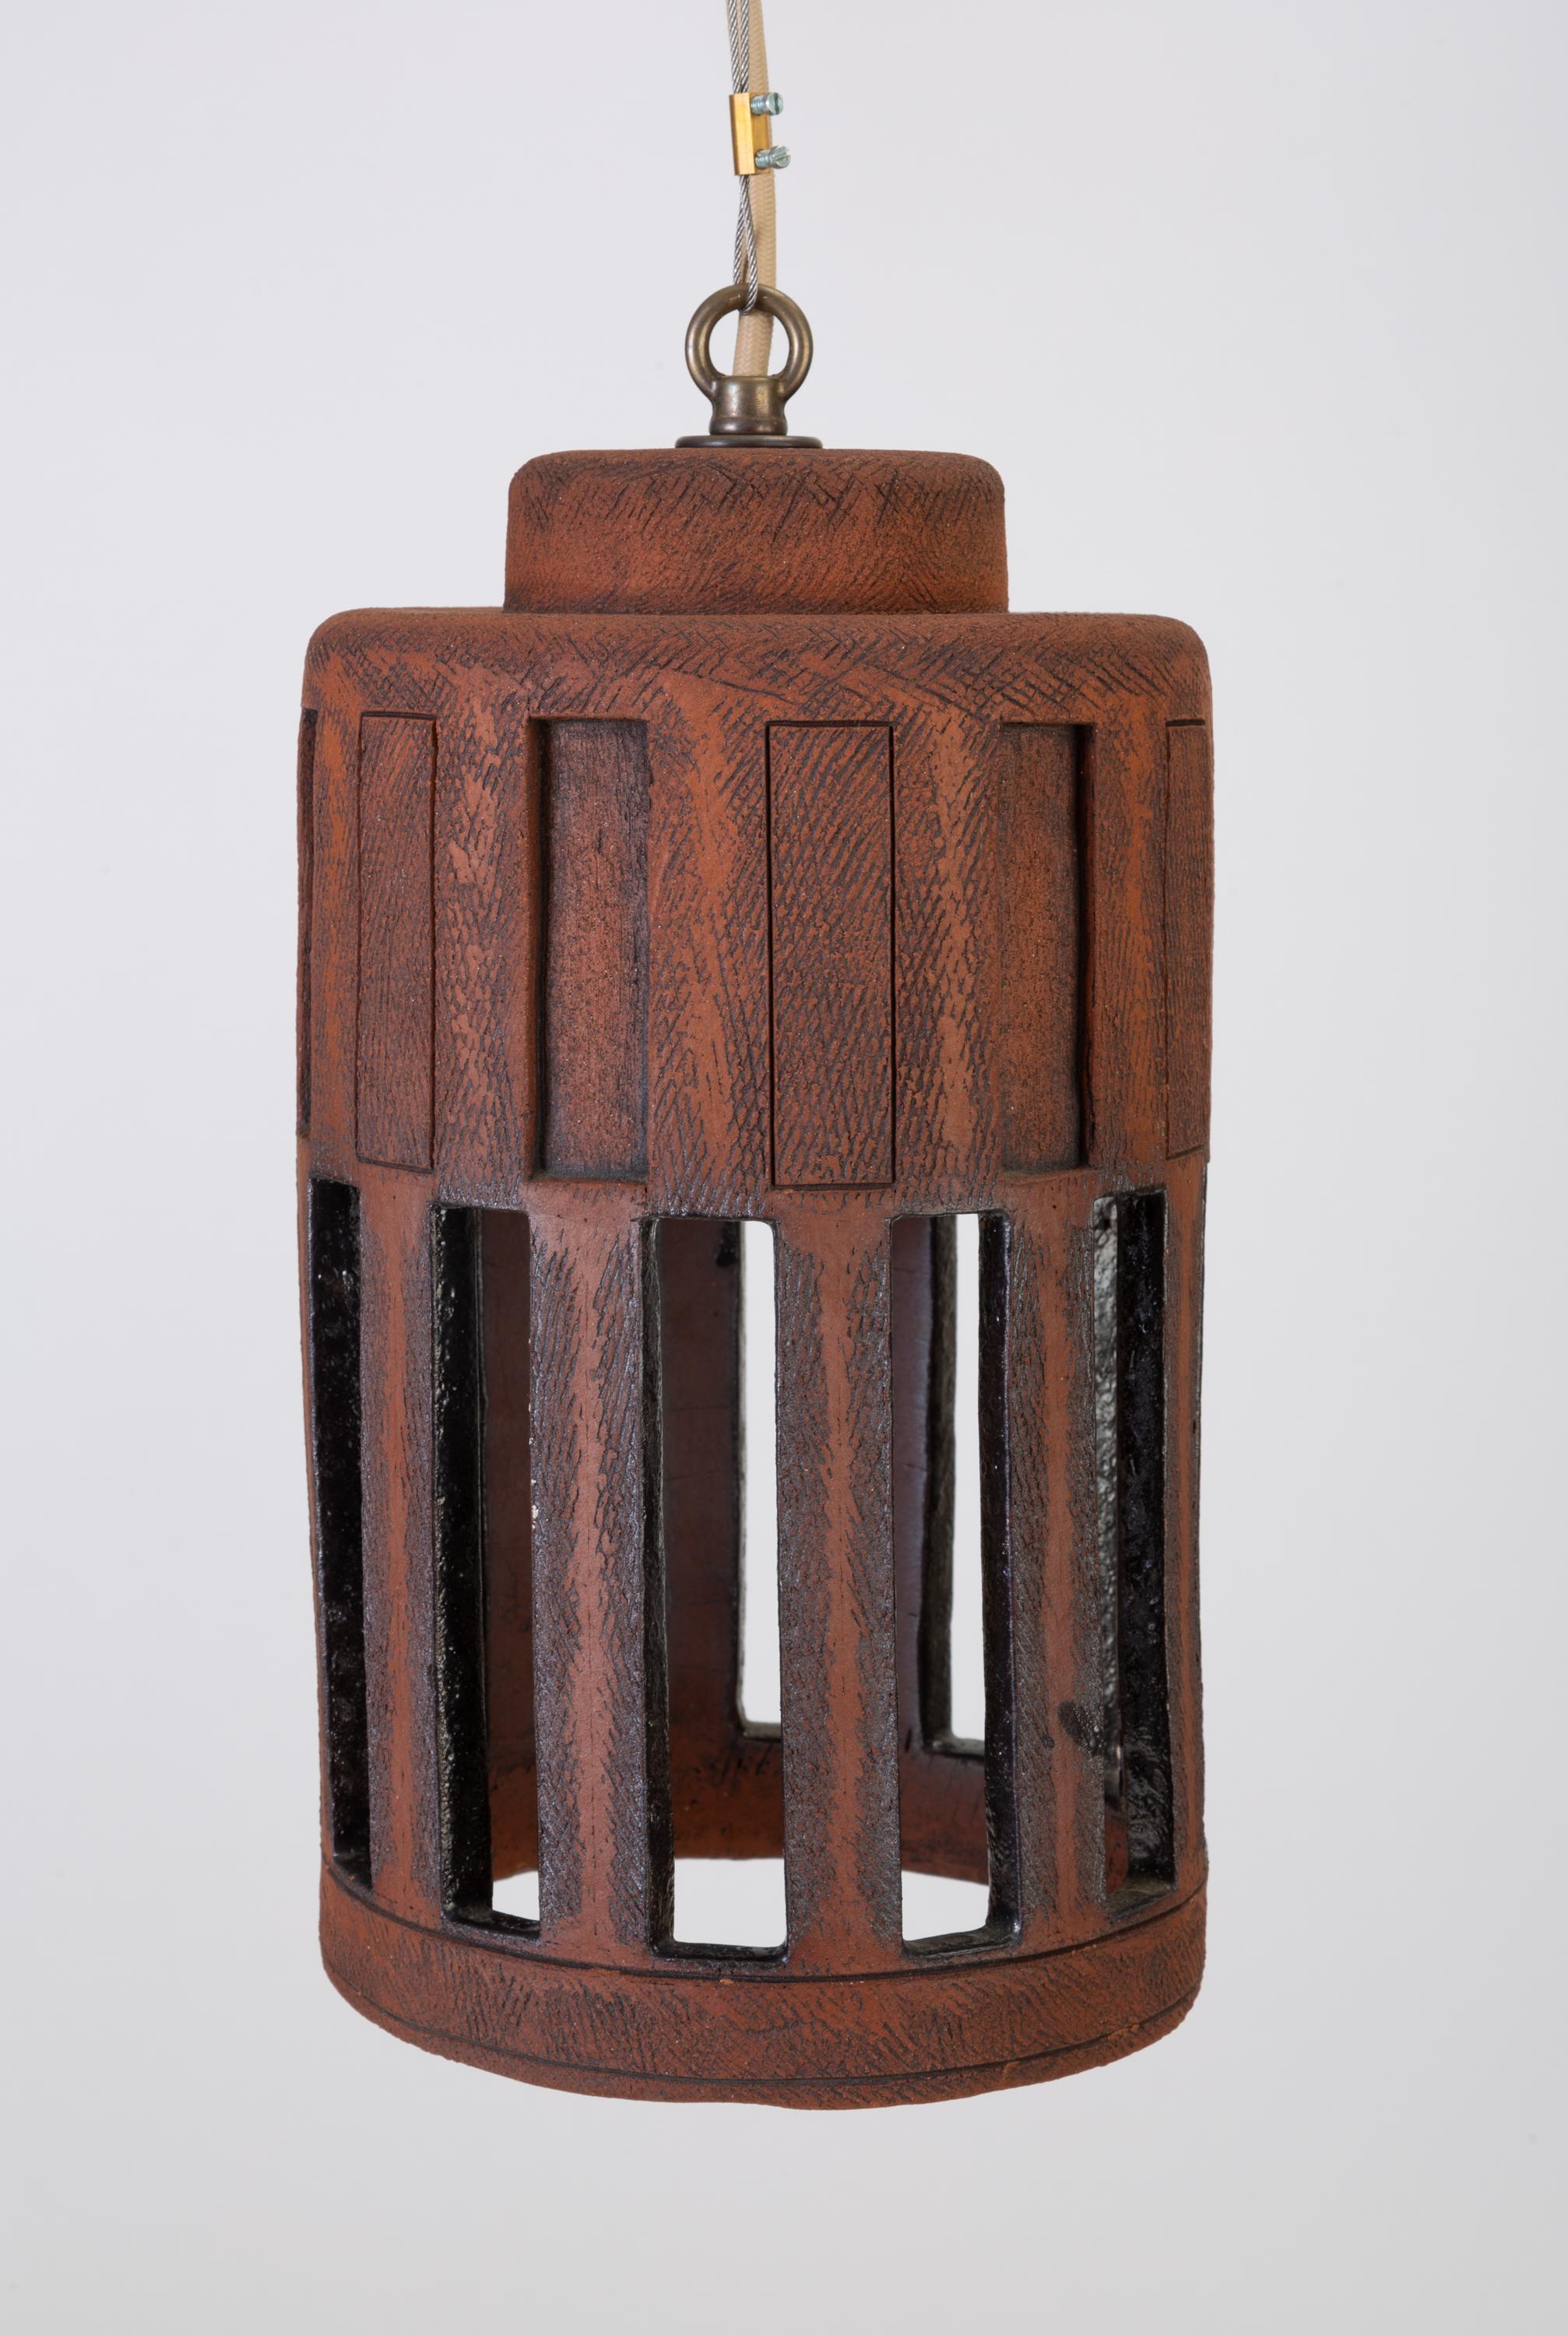 A unique stoneware pendant lamp with architectural, crenellated vents around the side. The lamp is made from a textured red-brown clay with handmade debossed and sgraffito detailing. This example has a long, narrow cylindrical shape with debossed